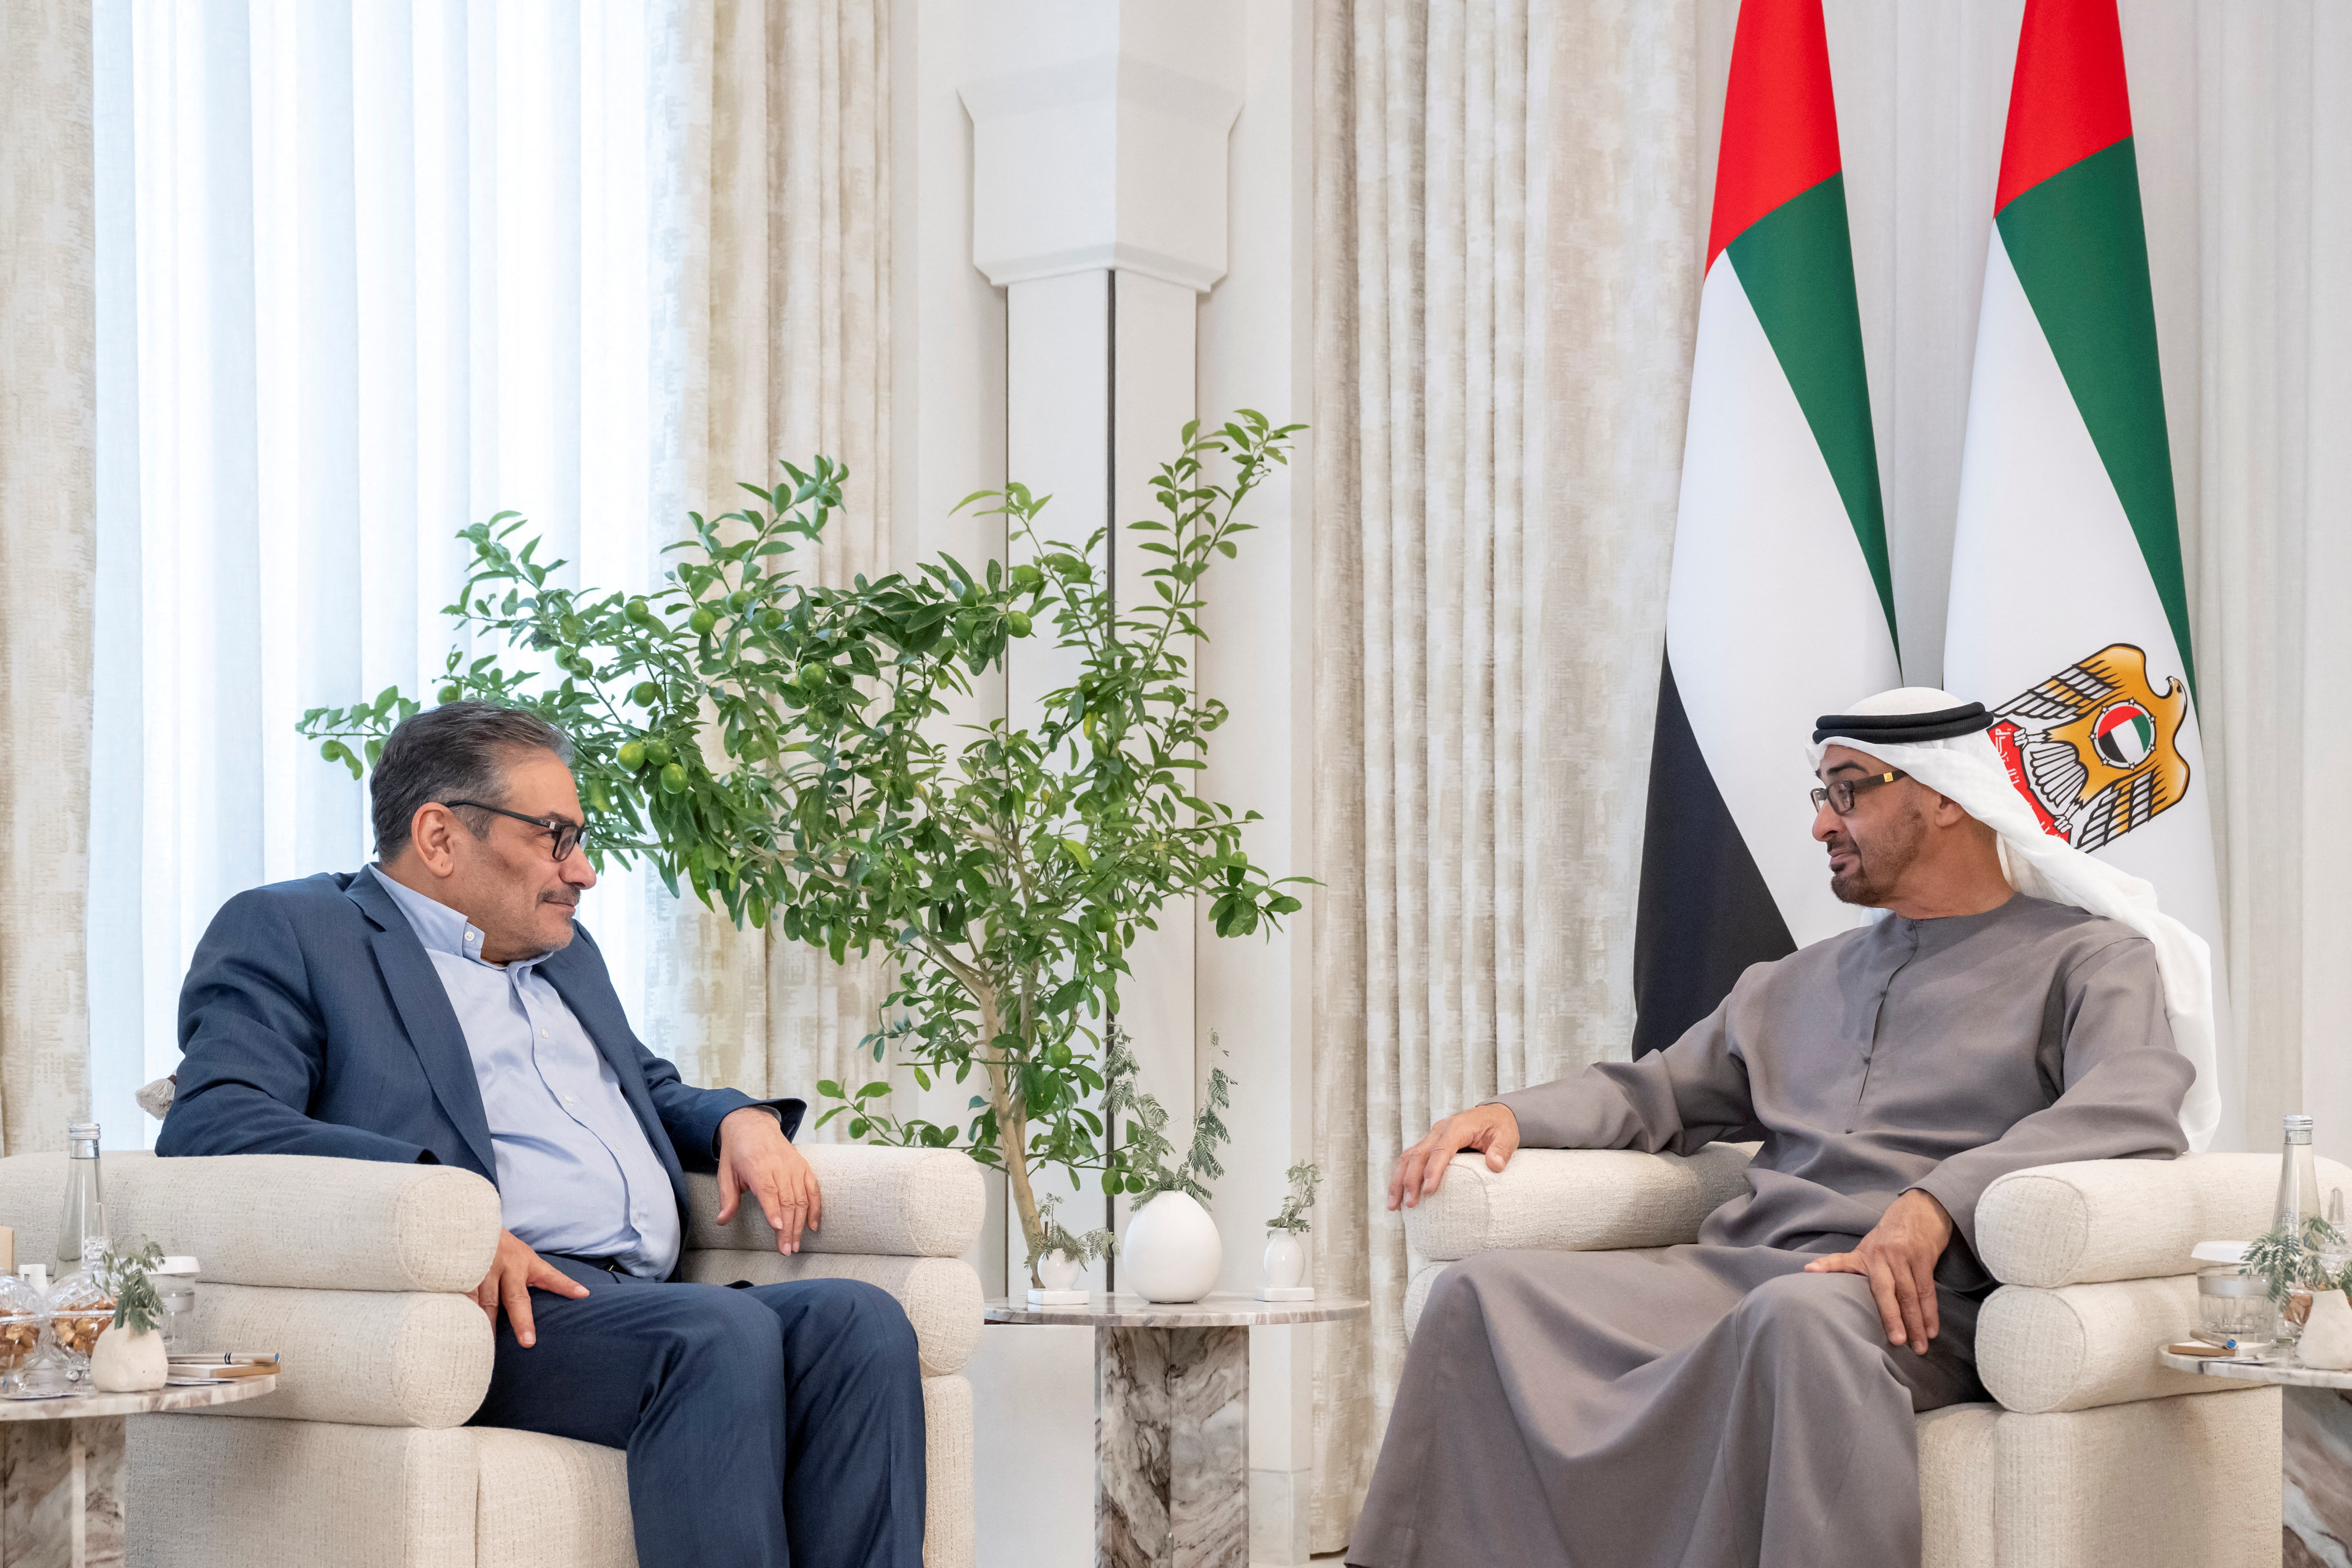 President of the United Arab Emirates Sheikh Mohamed bin Zayed Al Nahyan meets with Iran's top security official Ali Shamkhani, in Abu Dhabi